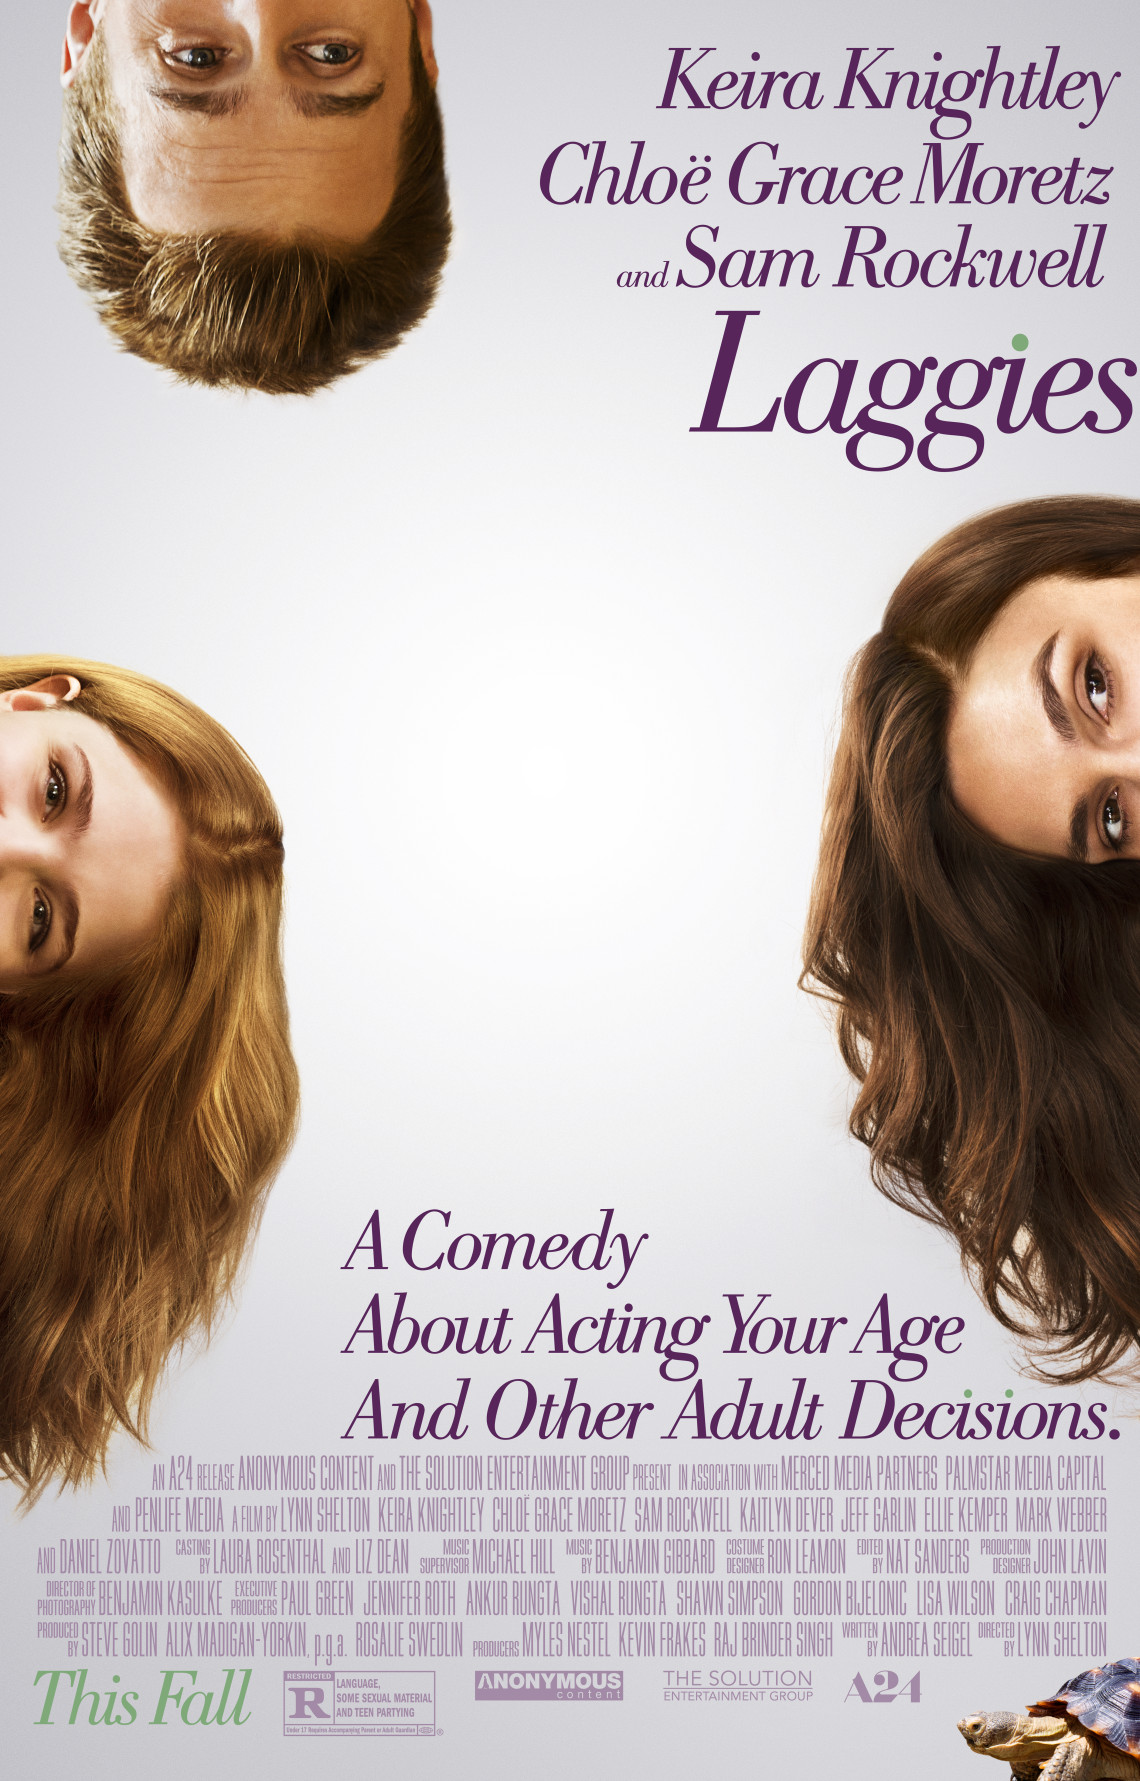 “Laggies” Trailer Grabs Life by the Horns